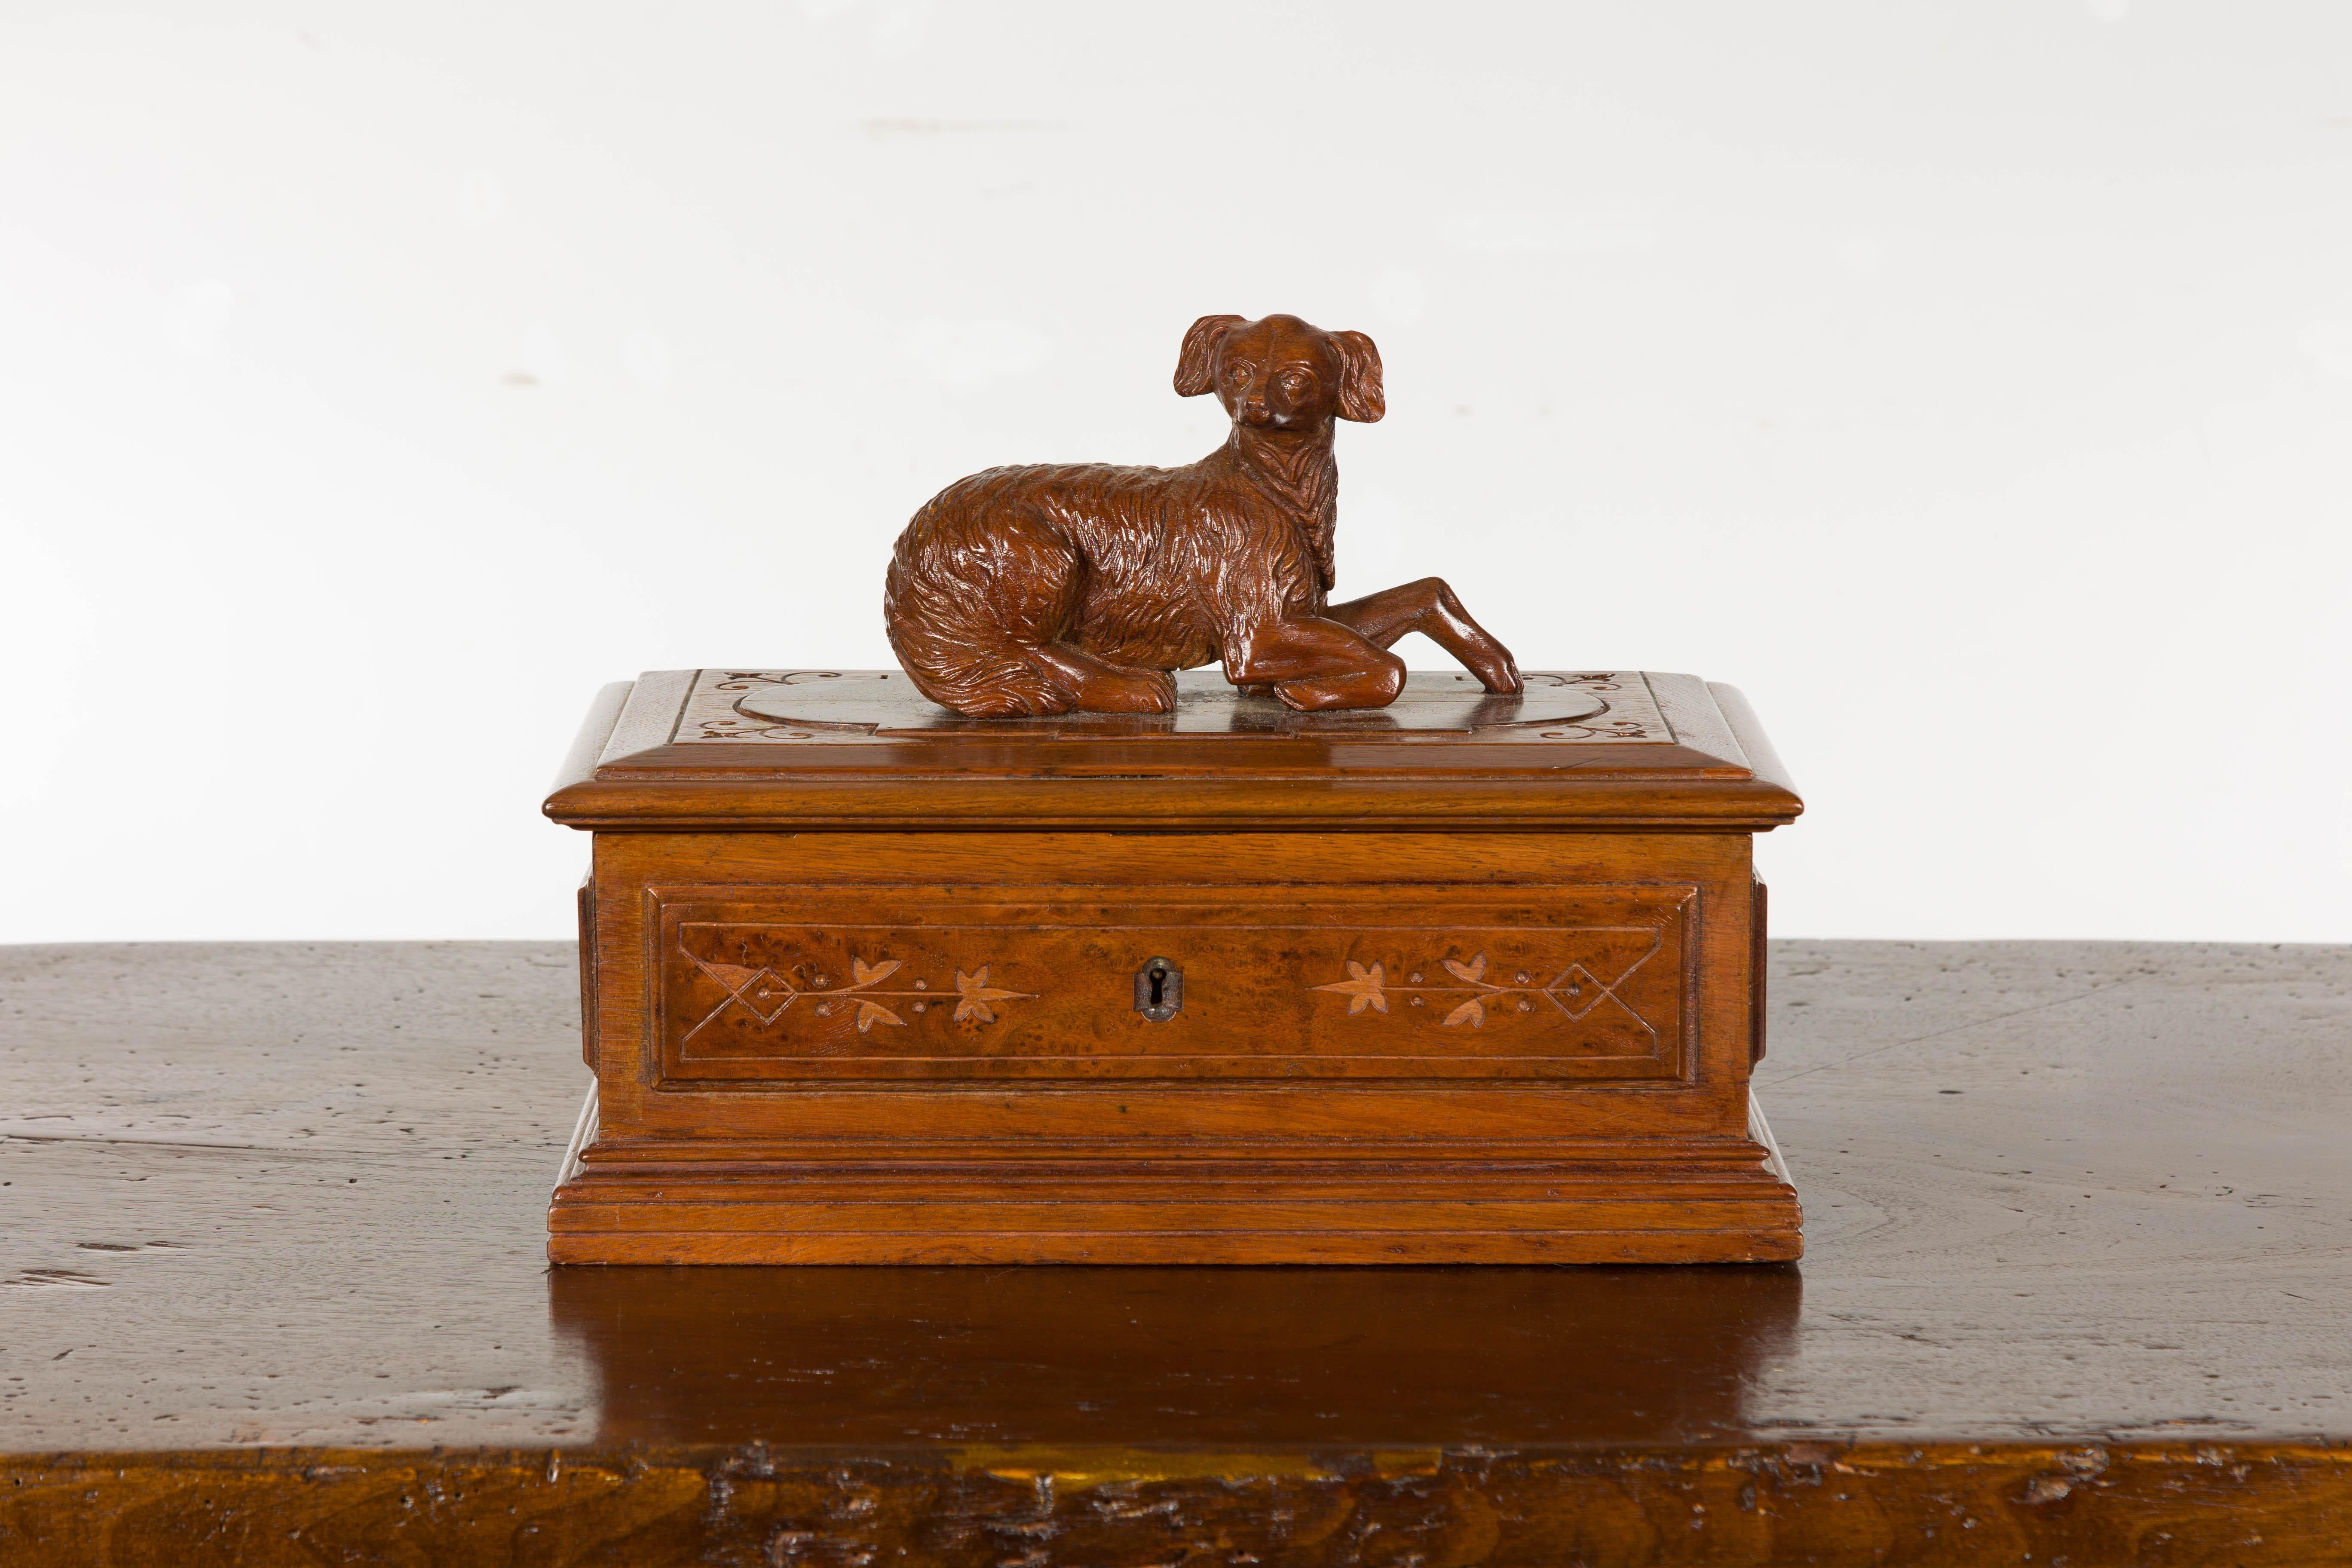 An English oak decorative box from the 19th century with carved dog on the lid, stylized foliage on the front and partitioned interior. Immerse yourself in the delicate craftsmanship of this 19th-century English oak decorative box, a piece that